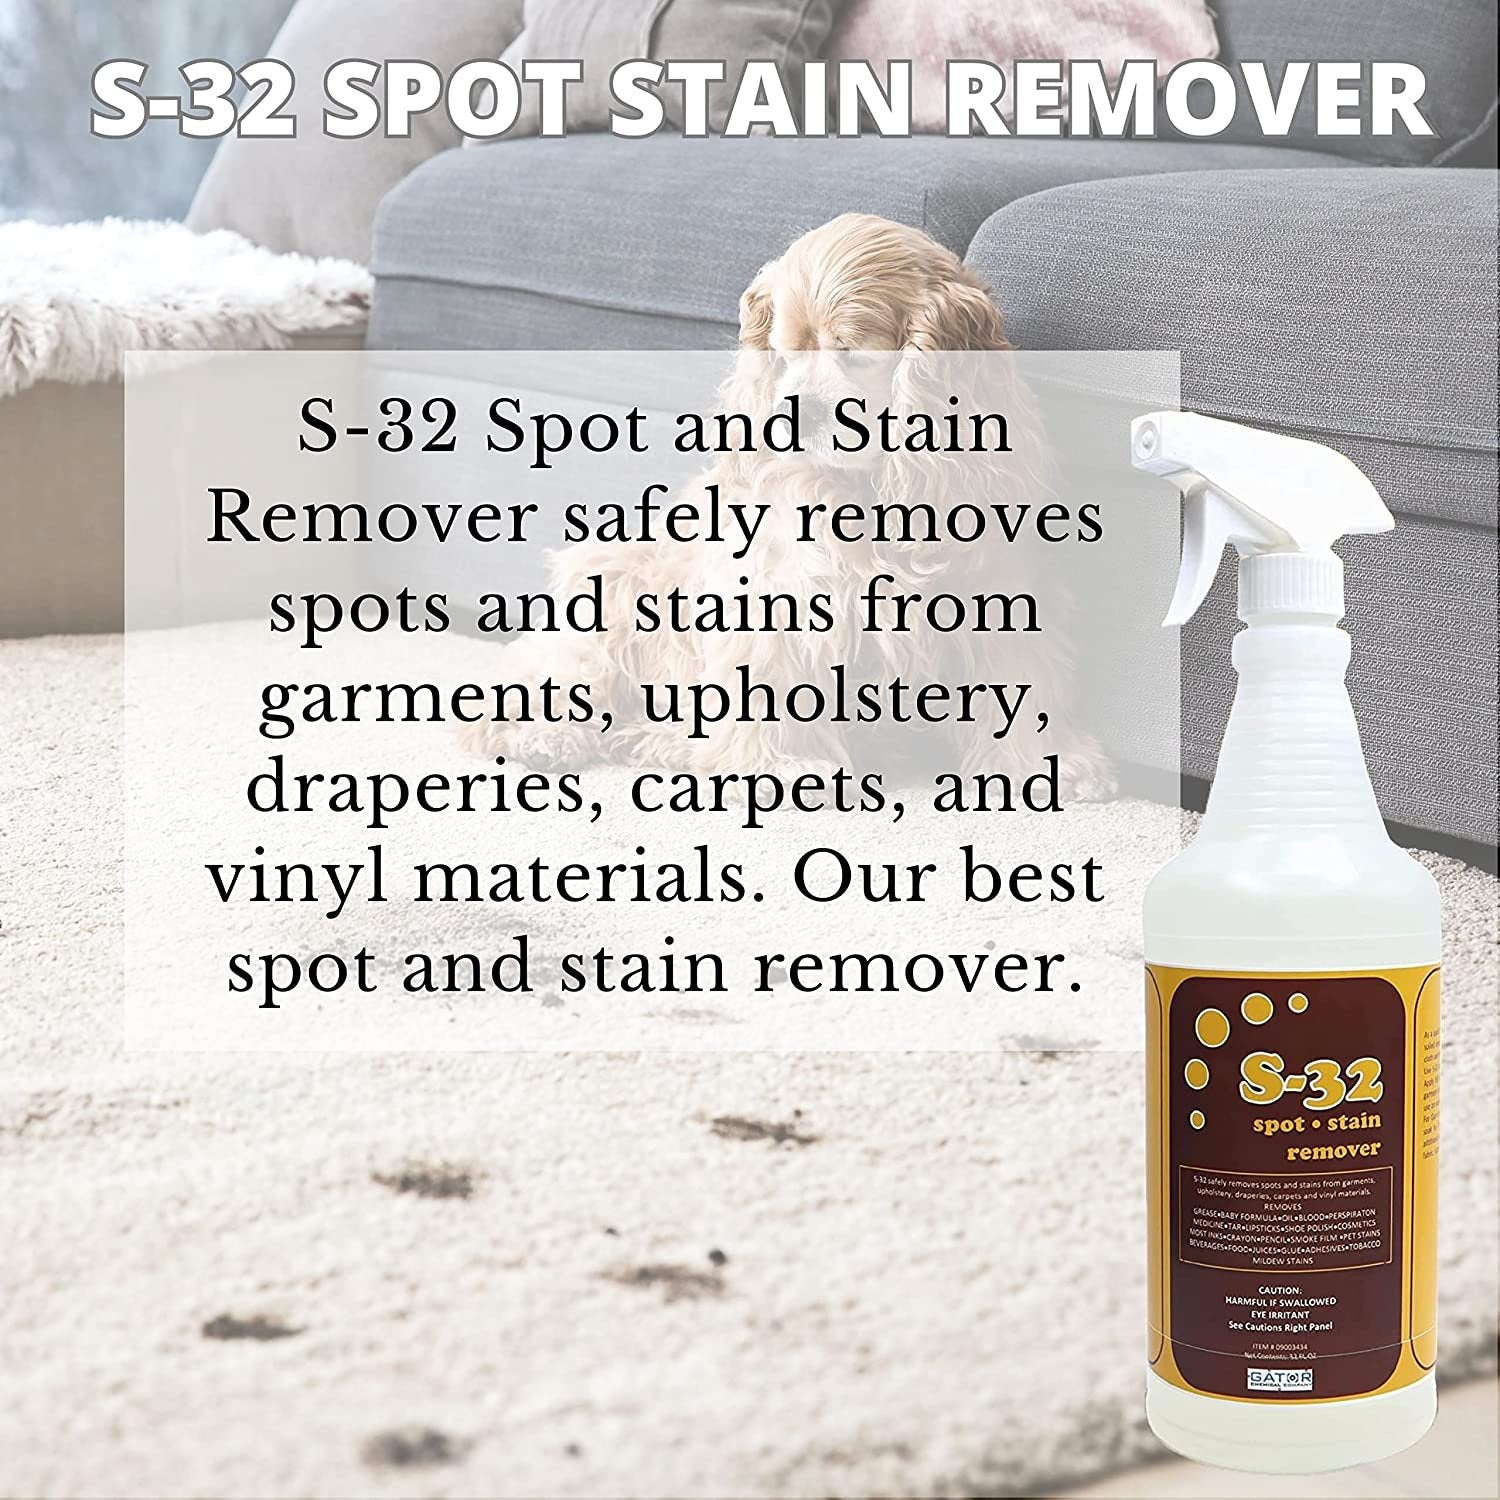 Gator Chemical Company S-32 Liquid Spot and Stain Remover - Multipurpose Cleaner for Laundry, Carpet & Upholstery - Professional Strength Stain Remover - 32 Fl Oz Spray Bottle with Bonus Key Chain